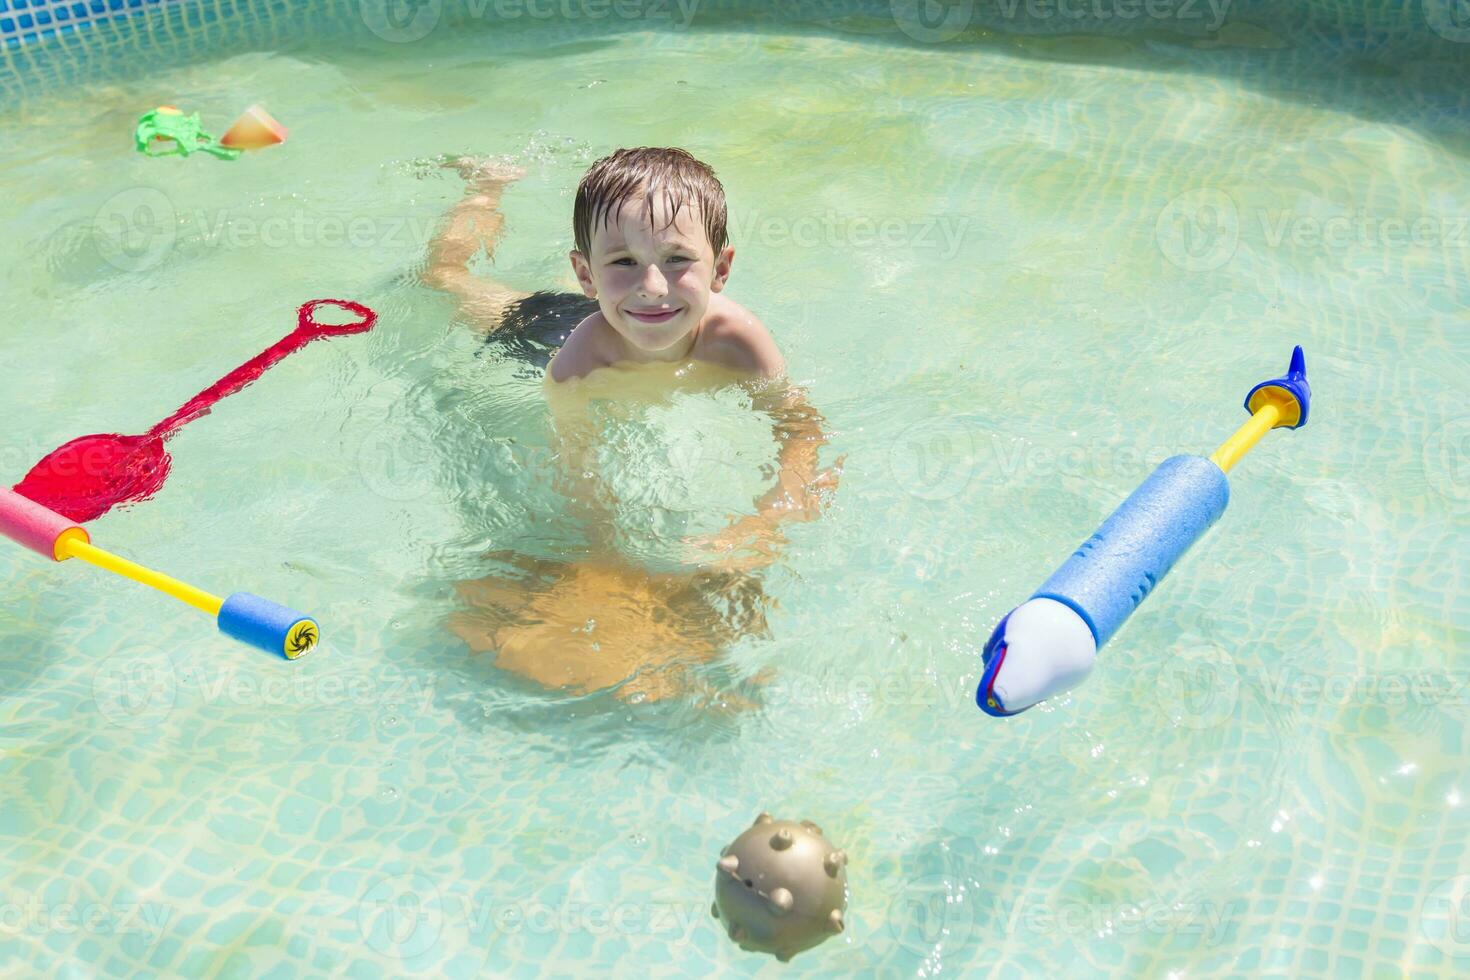 A child swims in the pool with toys. Boy bathes in water photo